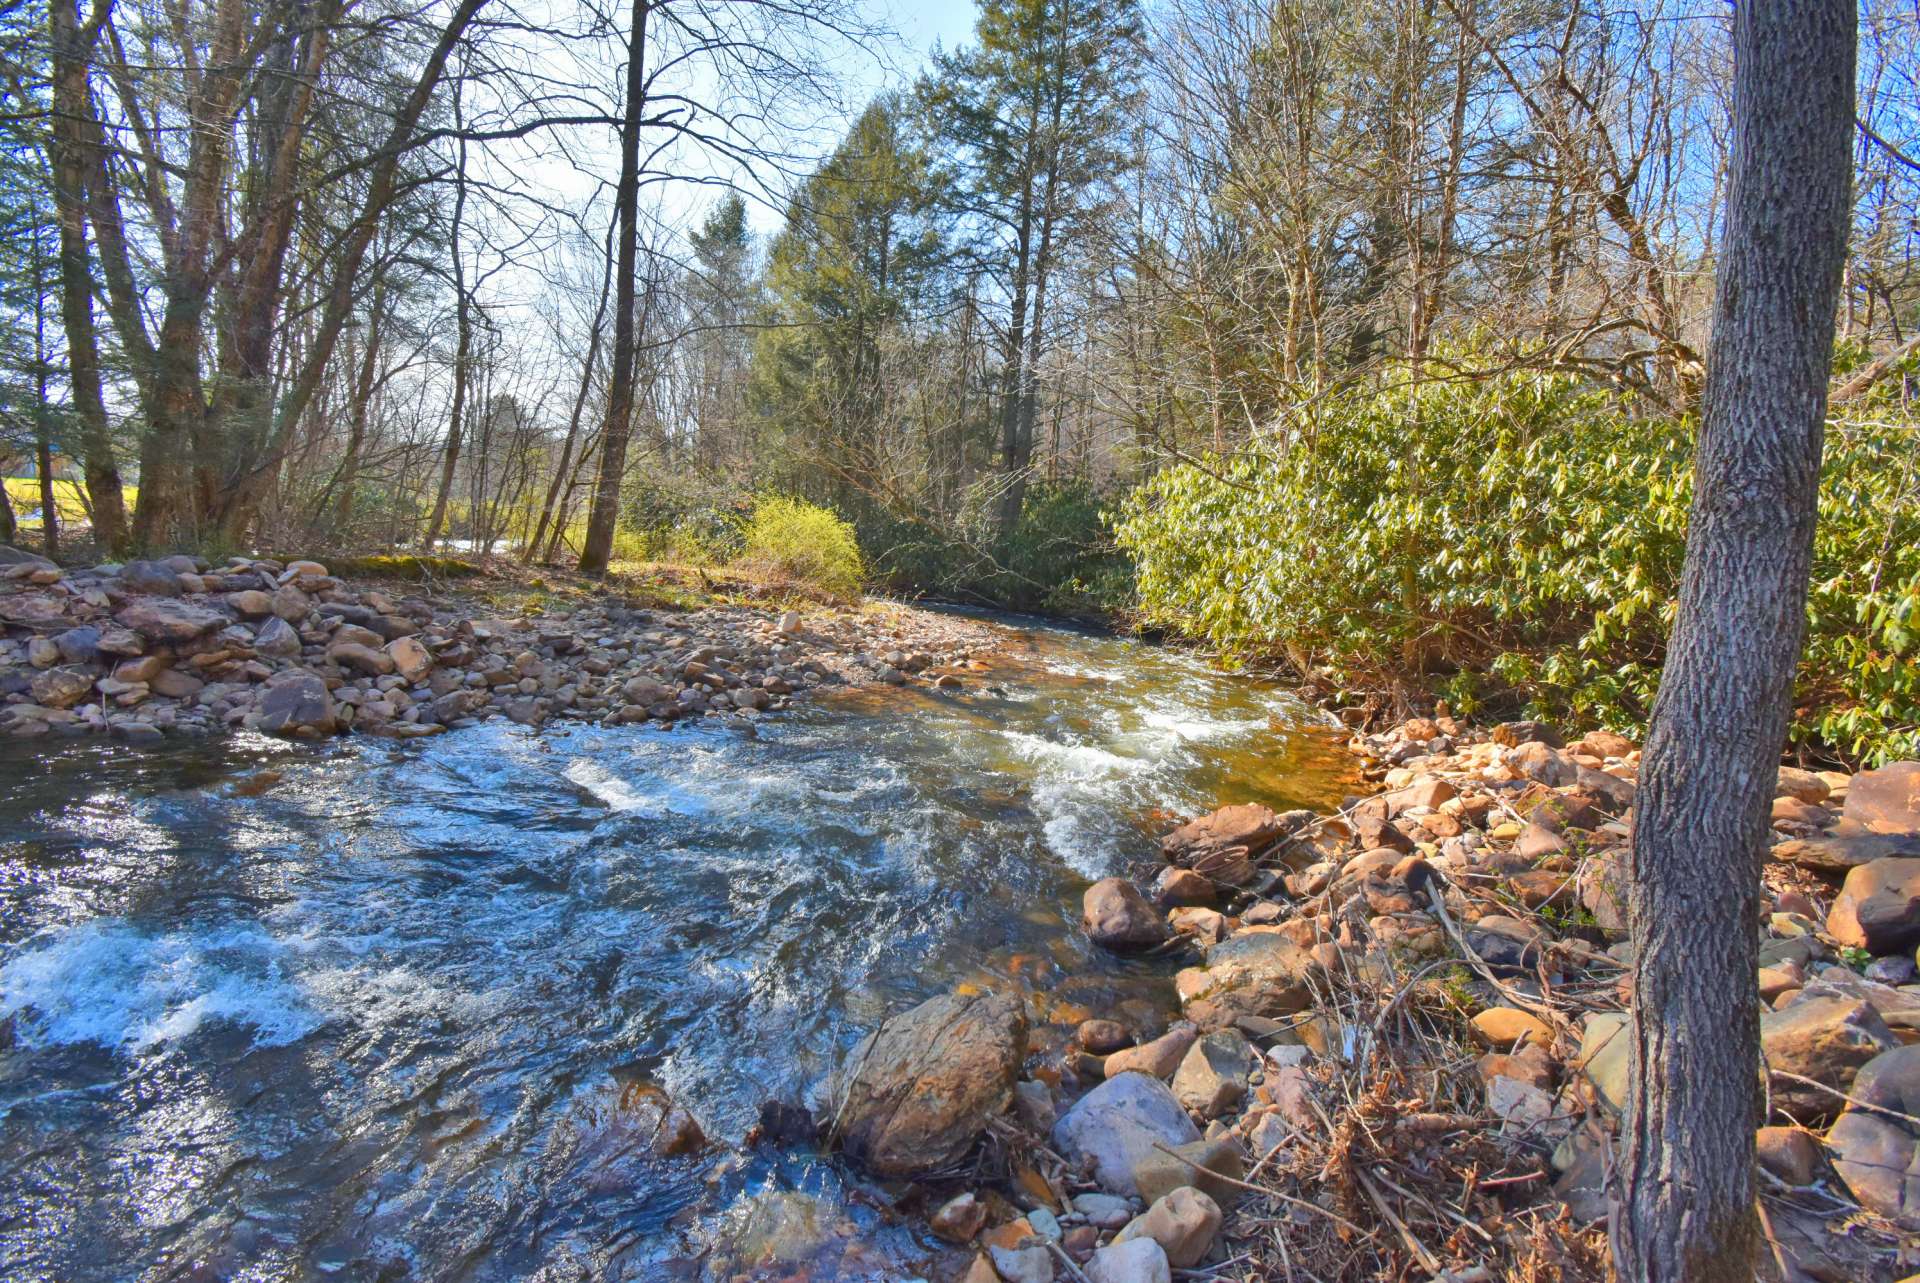 Whitetop Laurel Creek flows through the back of property offering fabulous fishing and other creekside recreation.